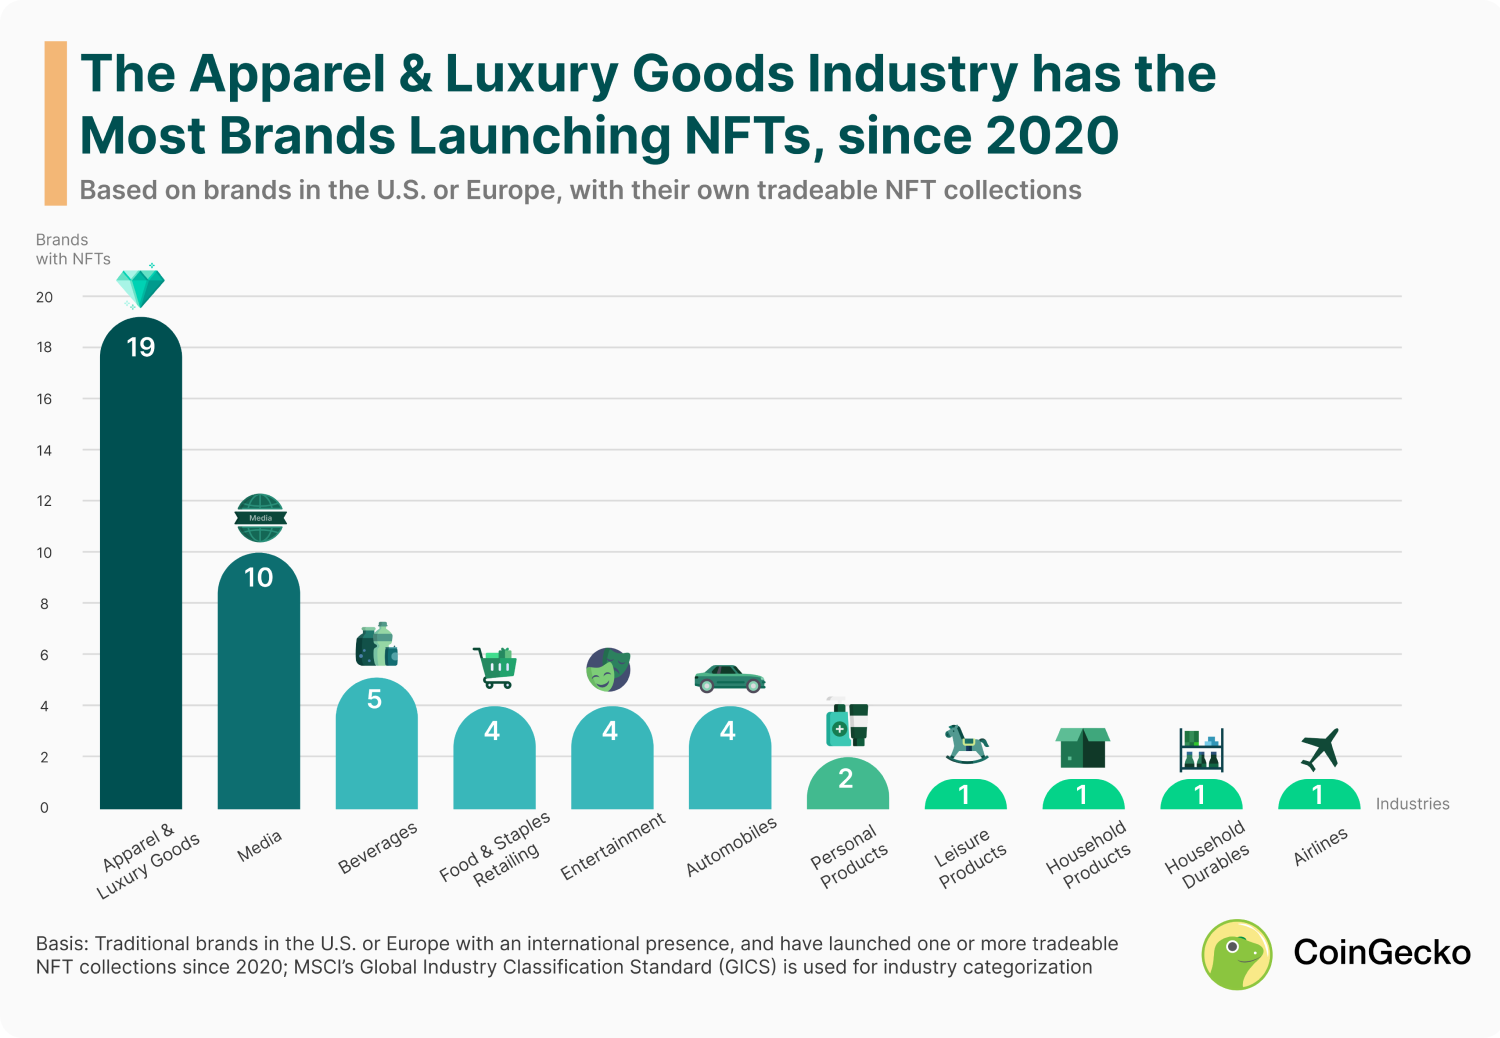 Apparel and Luxury Goods industry